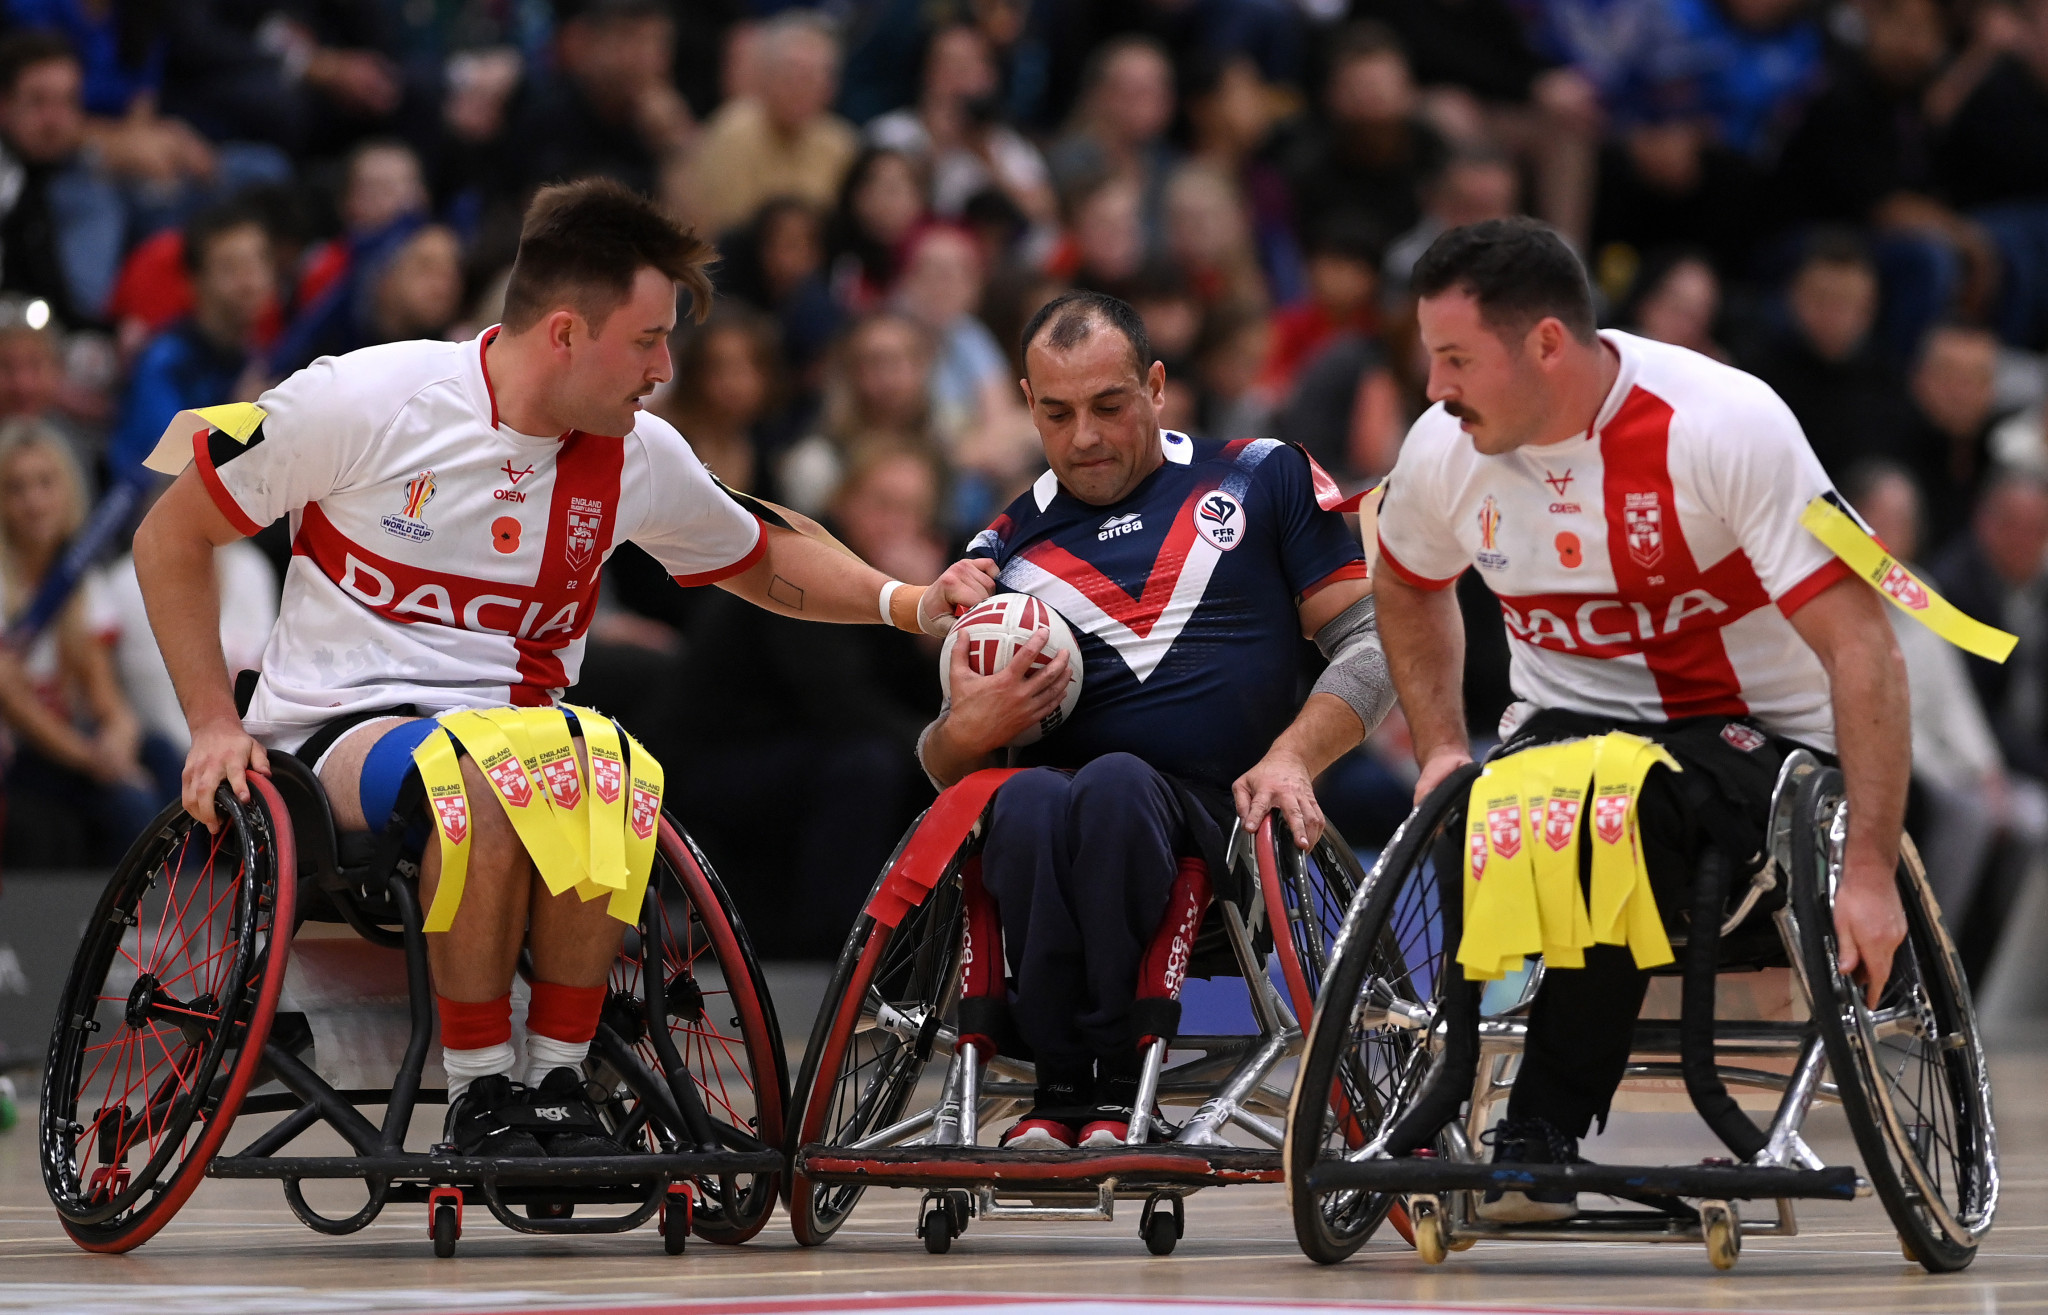 Wheelchair rugby could make an appearance at the 2023 World Games ©Getty Images